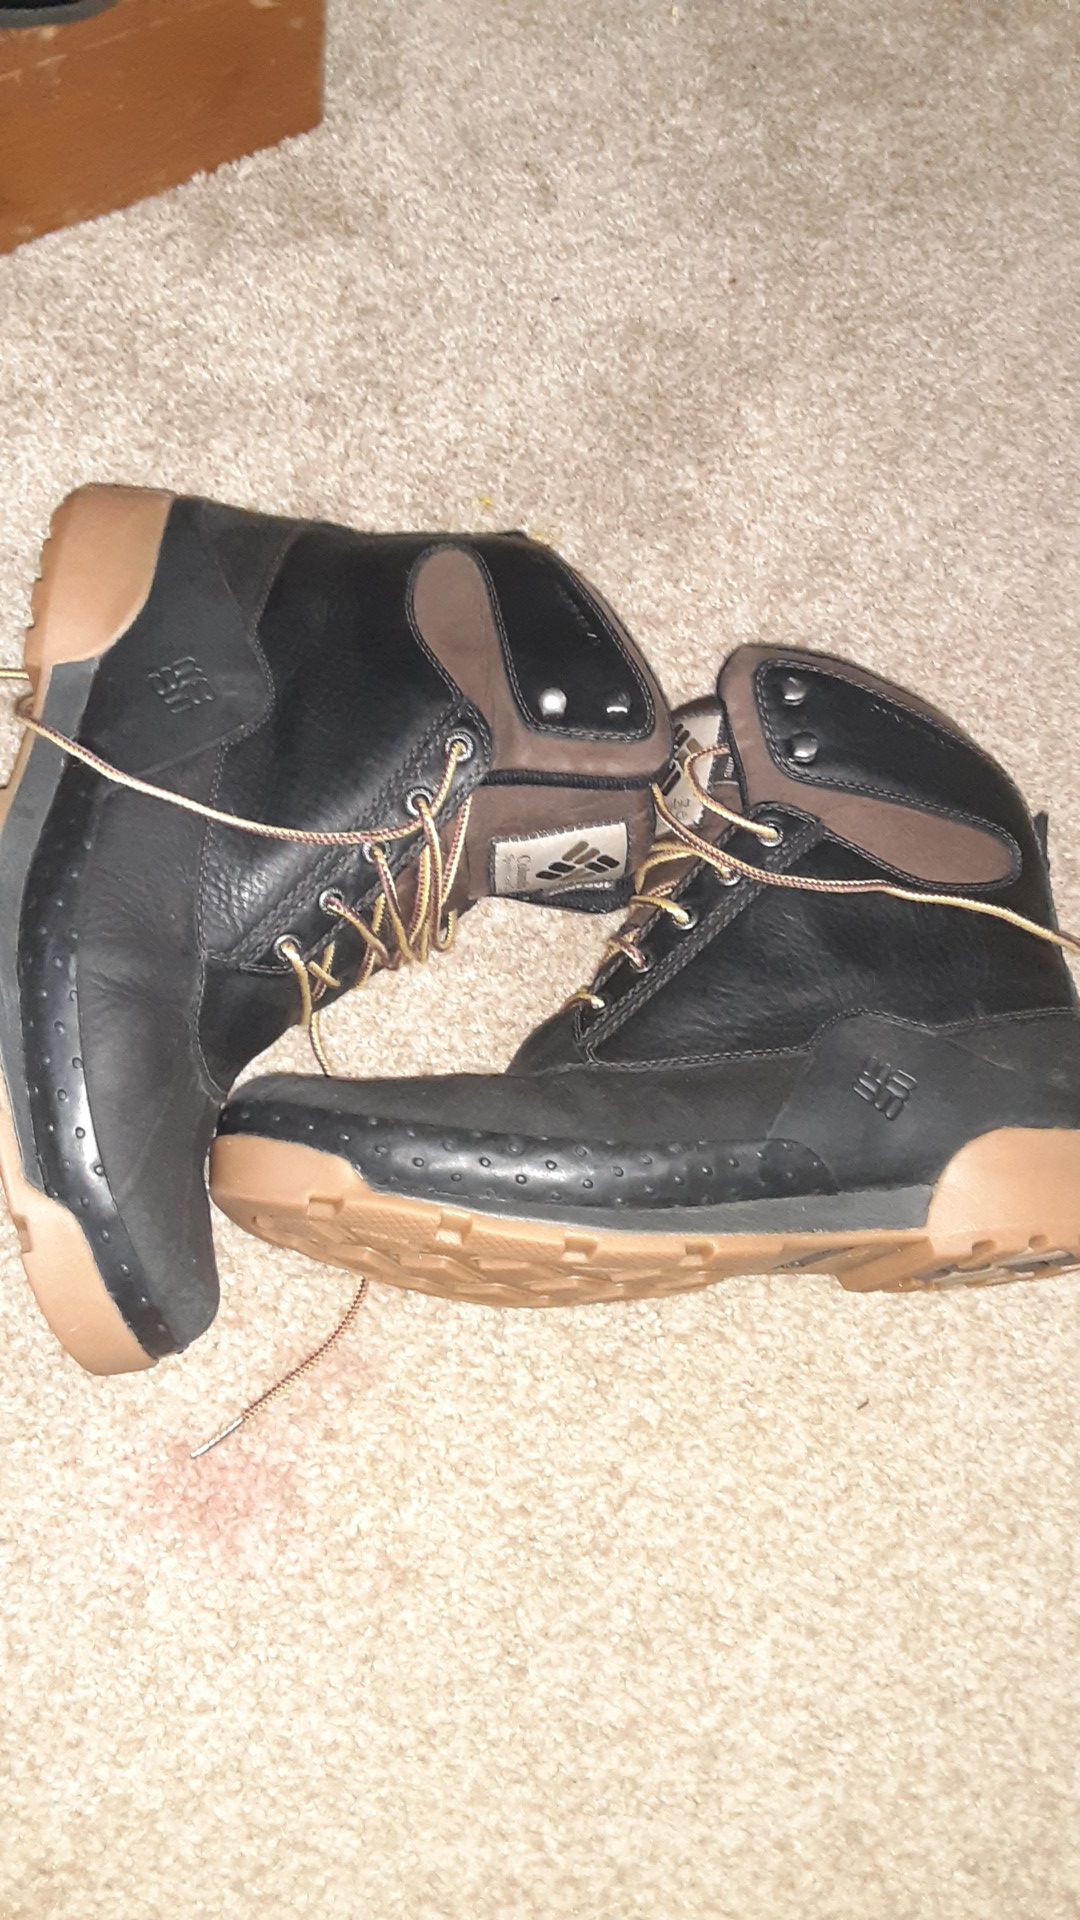 Colombia boots size 12